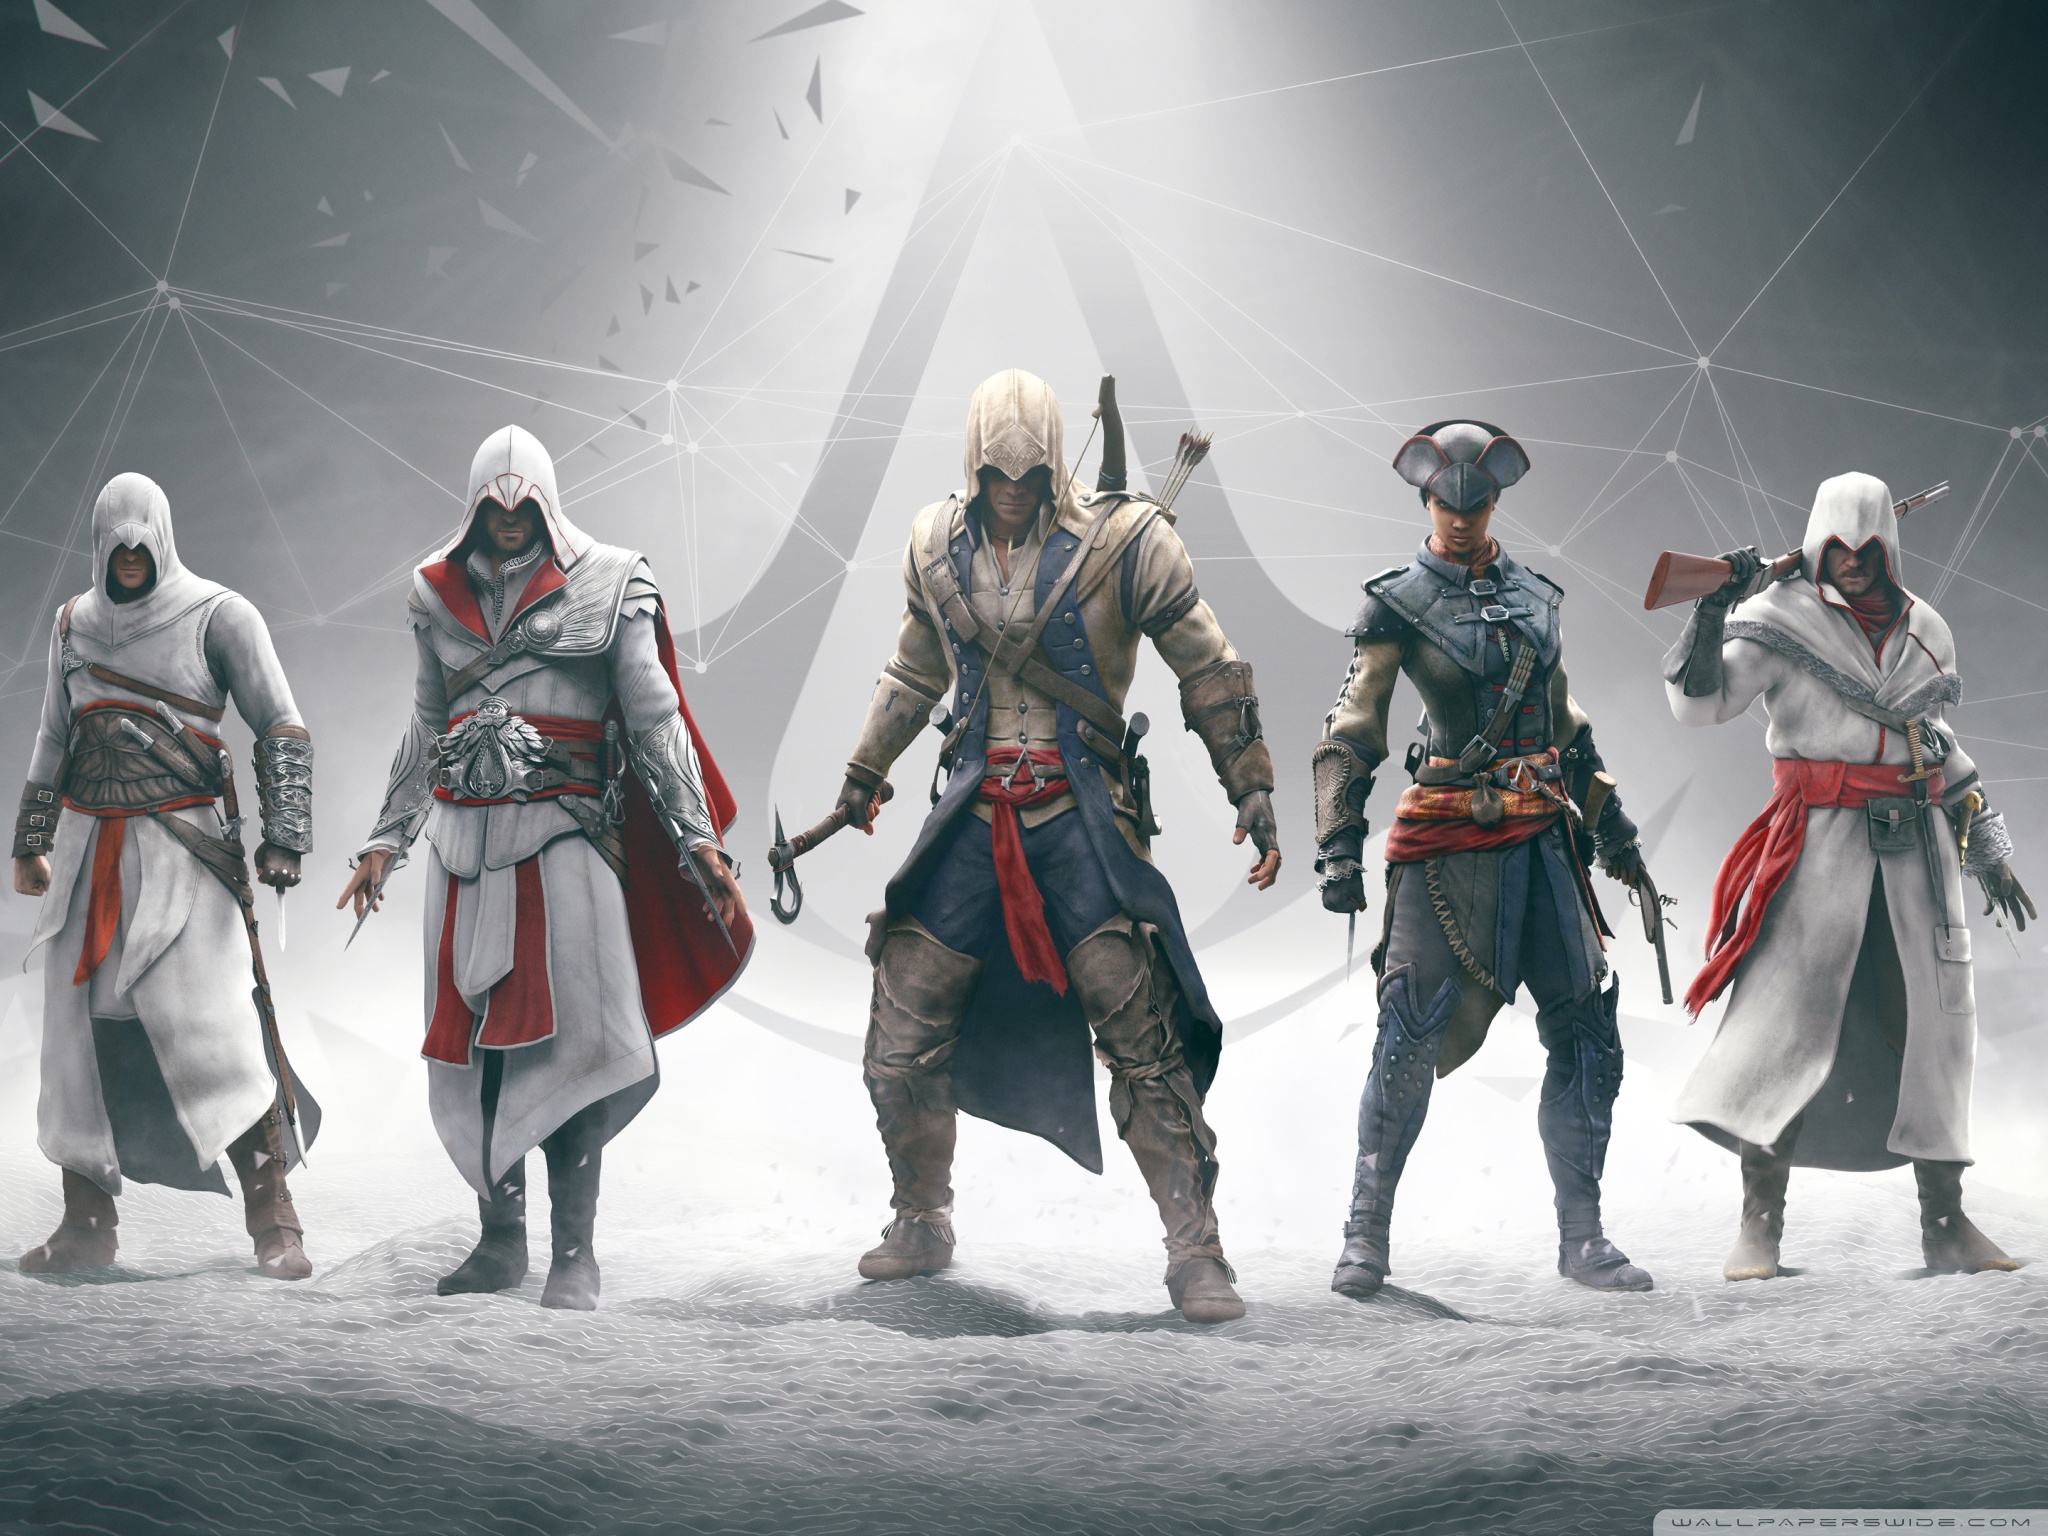 Assassin's Creed Wallpapers (67+ images inside)